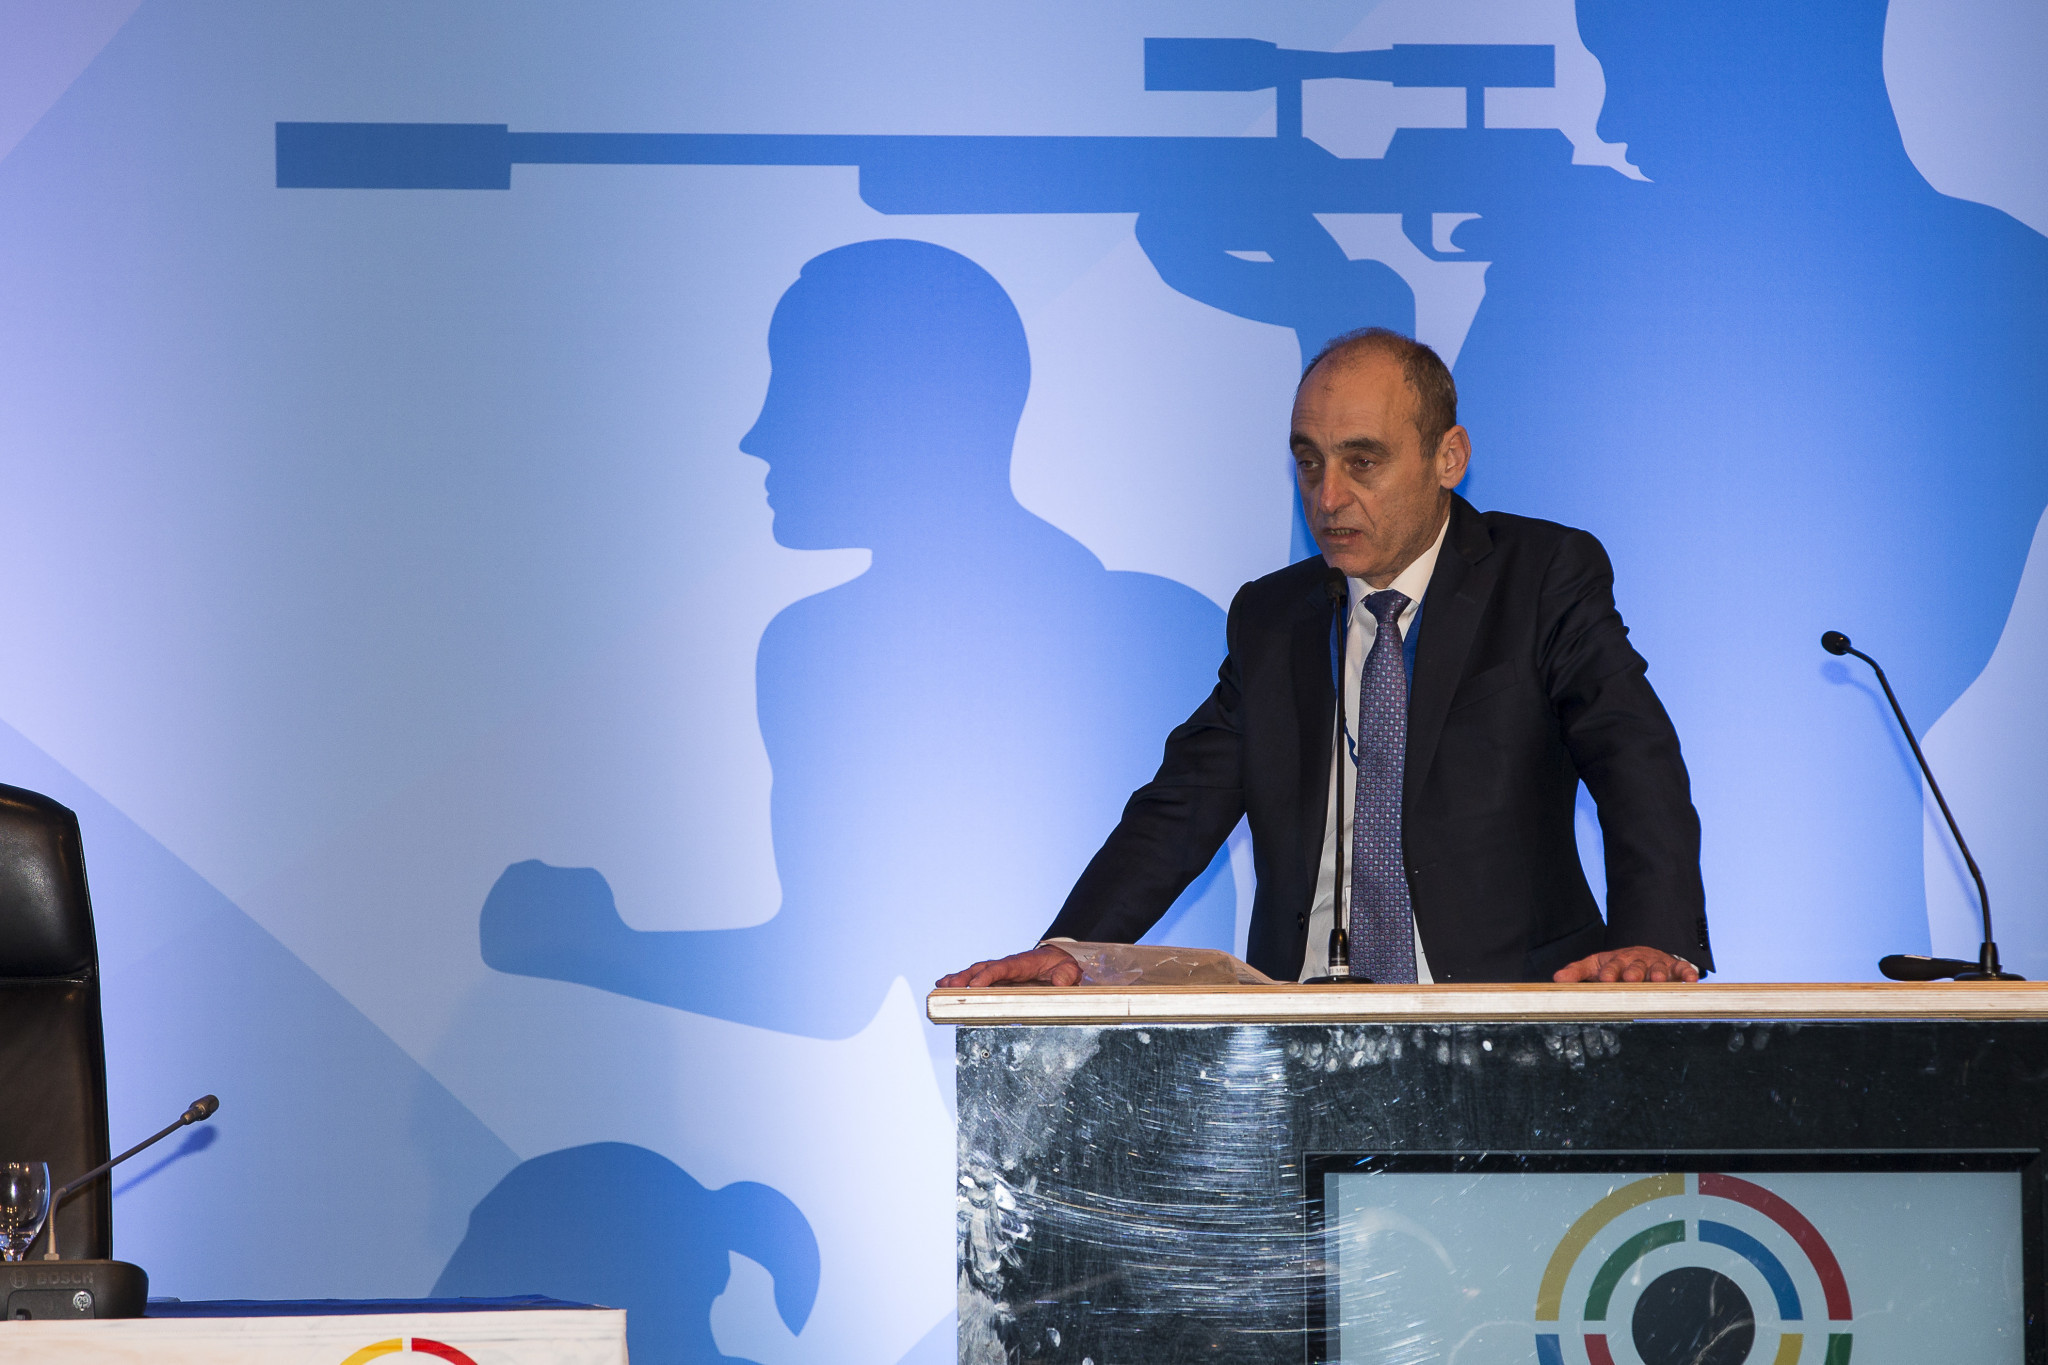 Exclusive: Agenda for European Shooting Confederation Assembly ignores call for removal of President